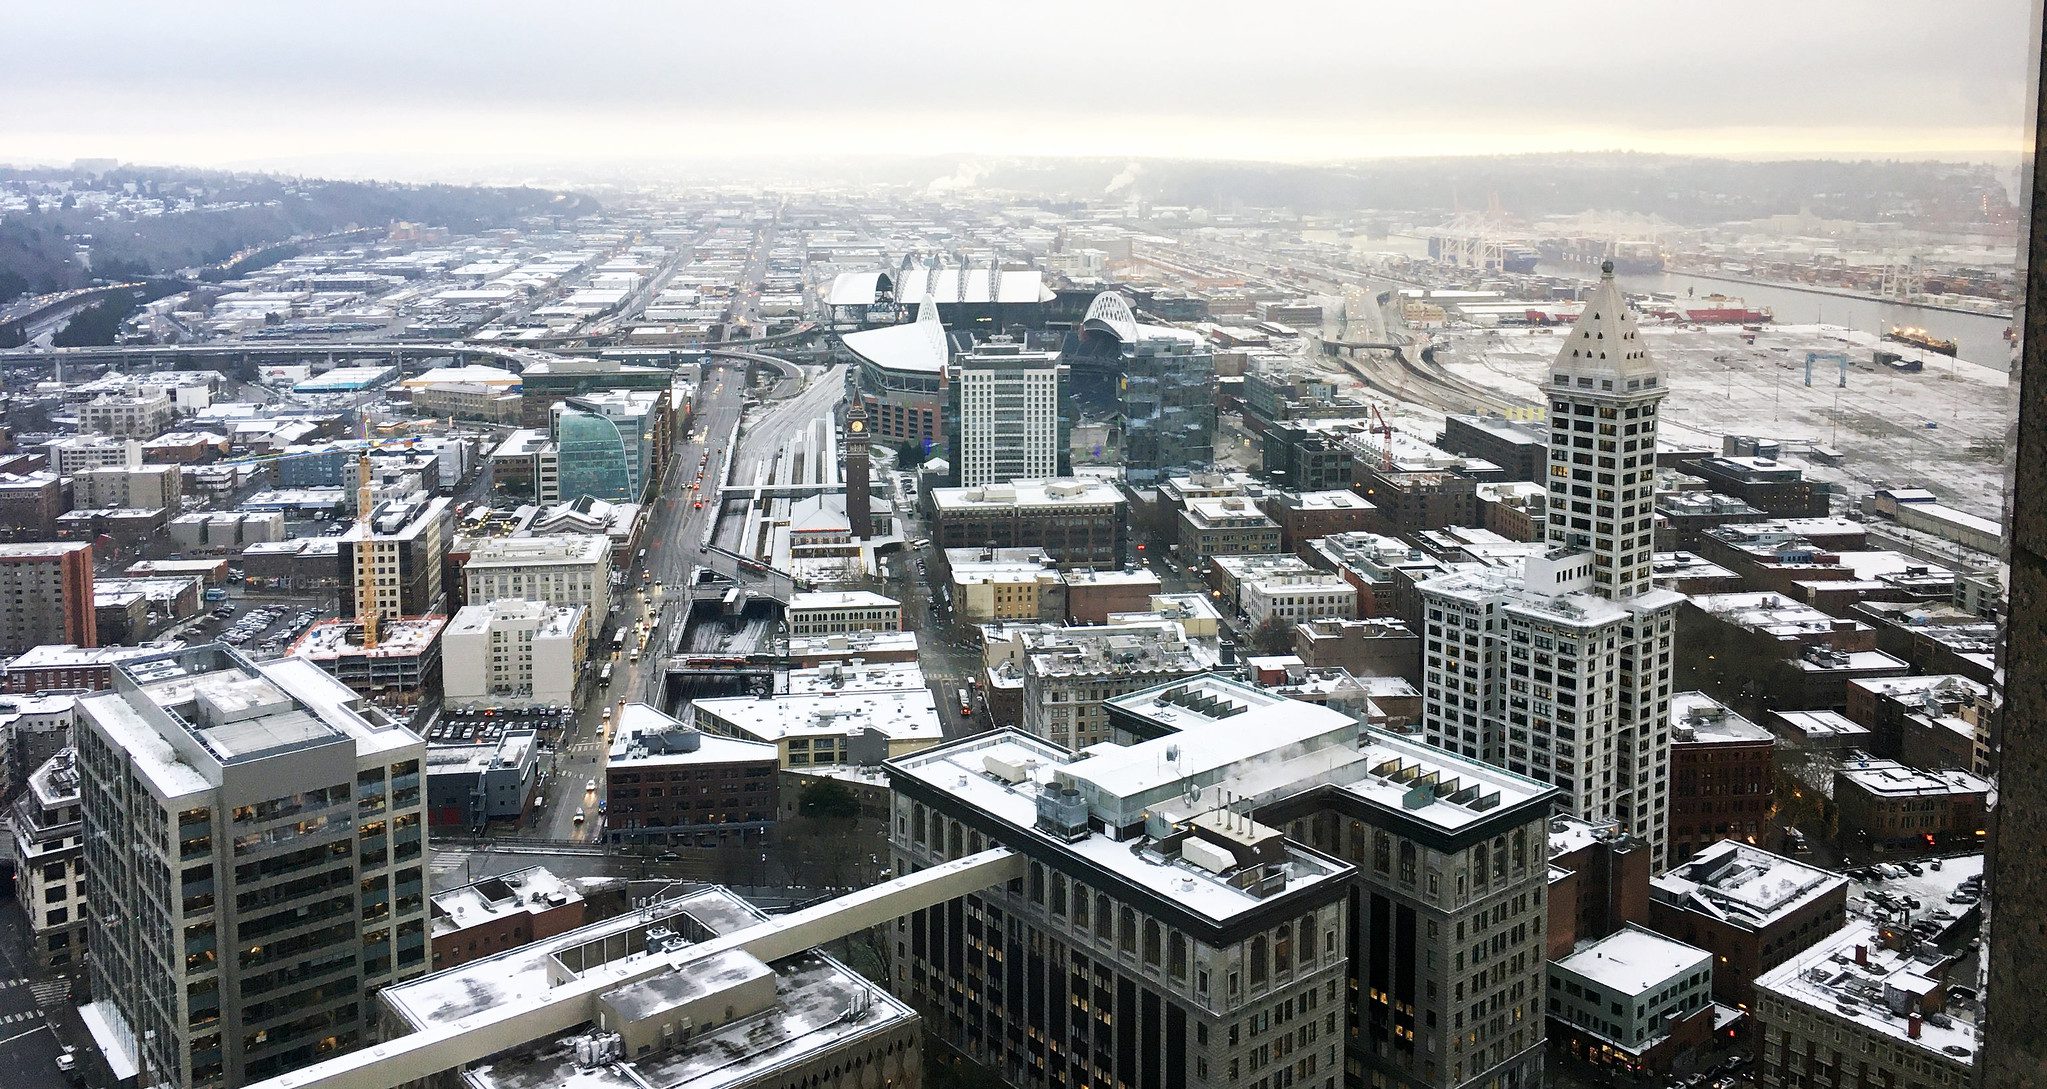 A view of the city on a wintery day. Large buildings and a stadium are visible, and clouds are above.